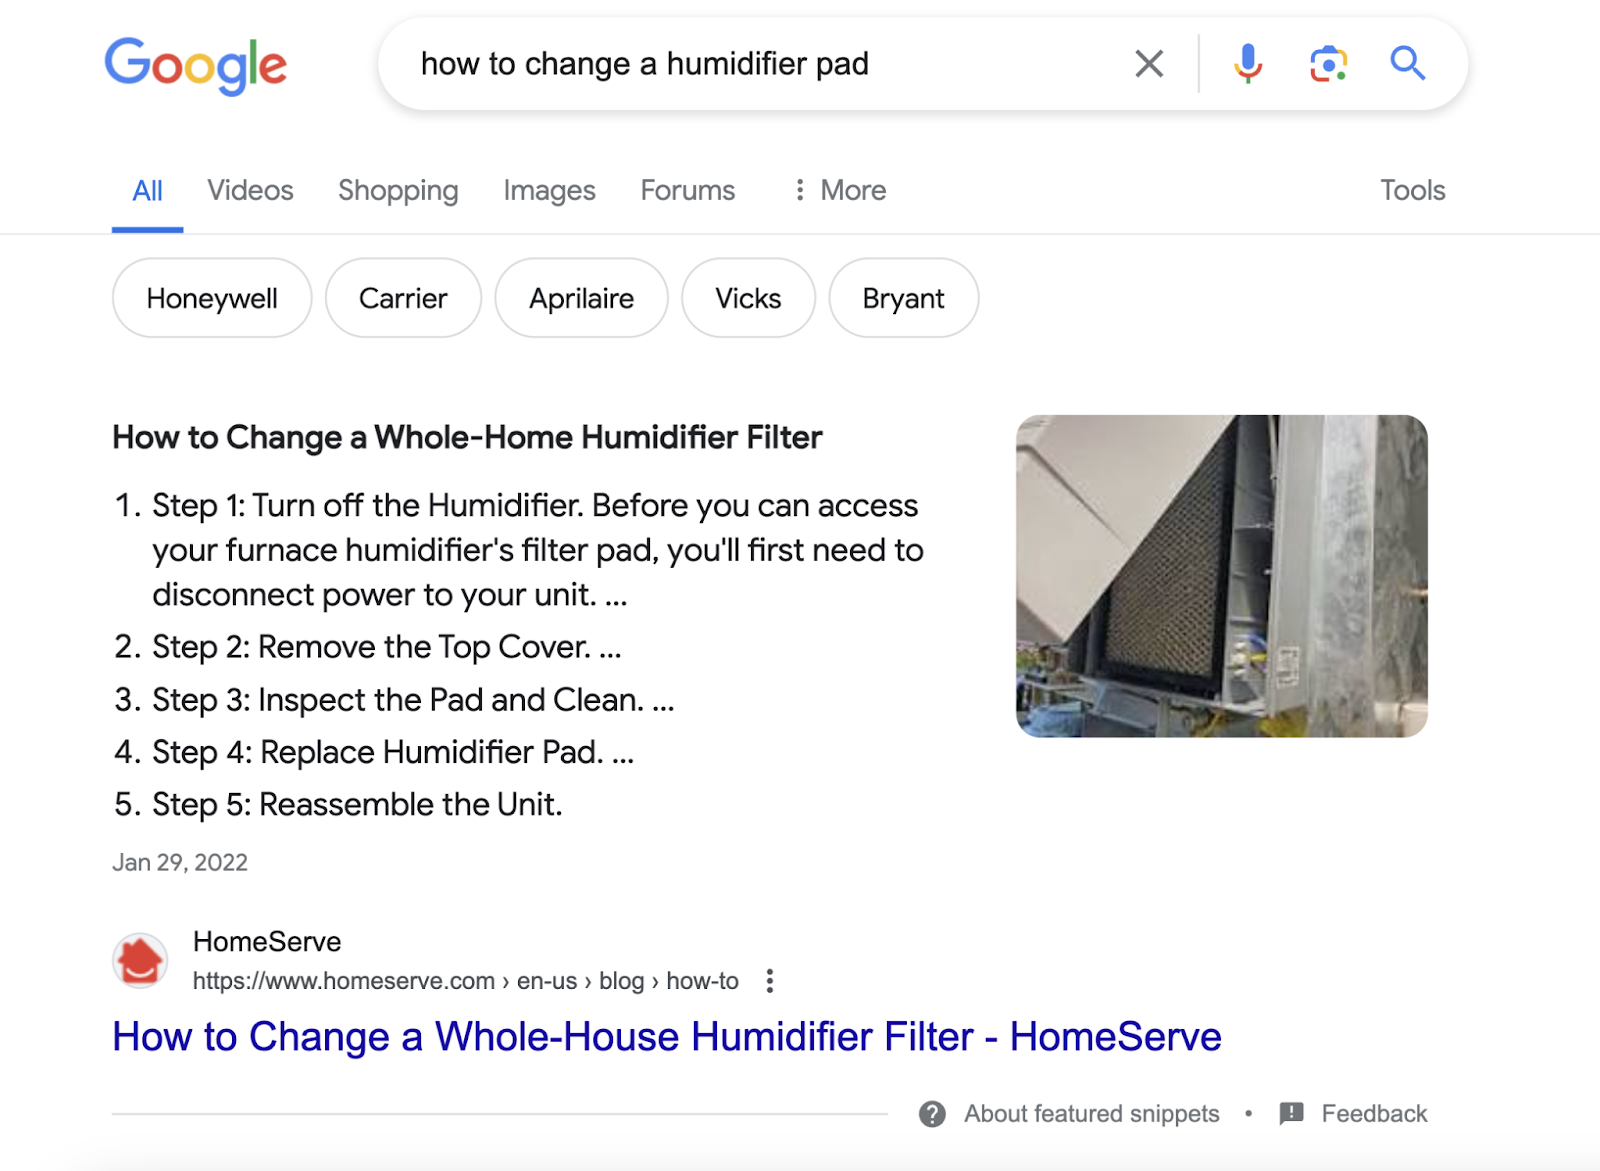 search for "how to change humidifier pad" has featured snippet with steps 1 through 5